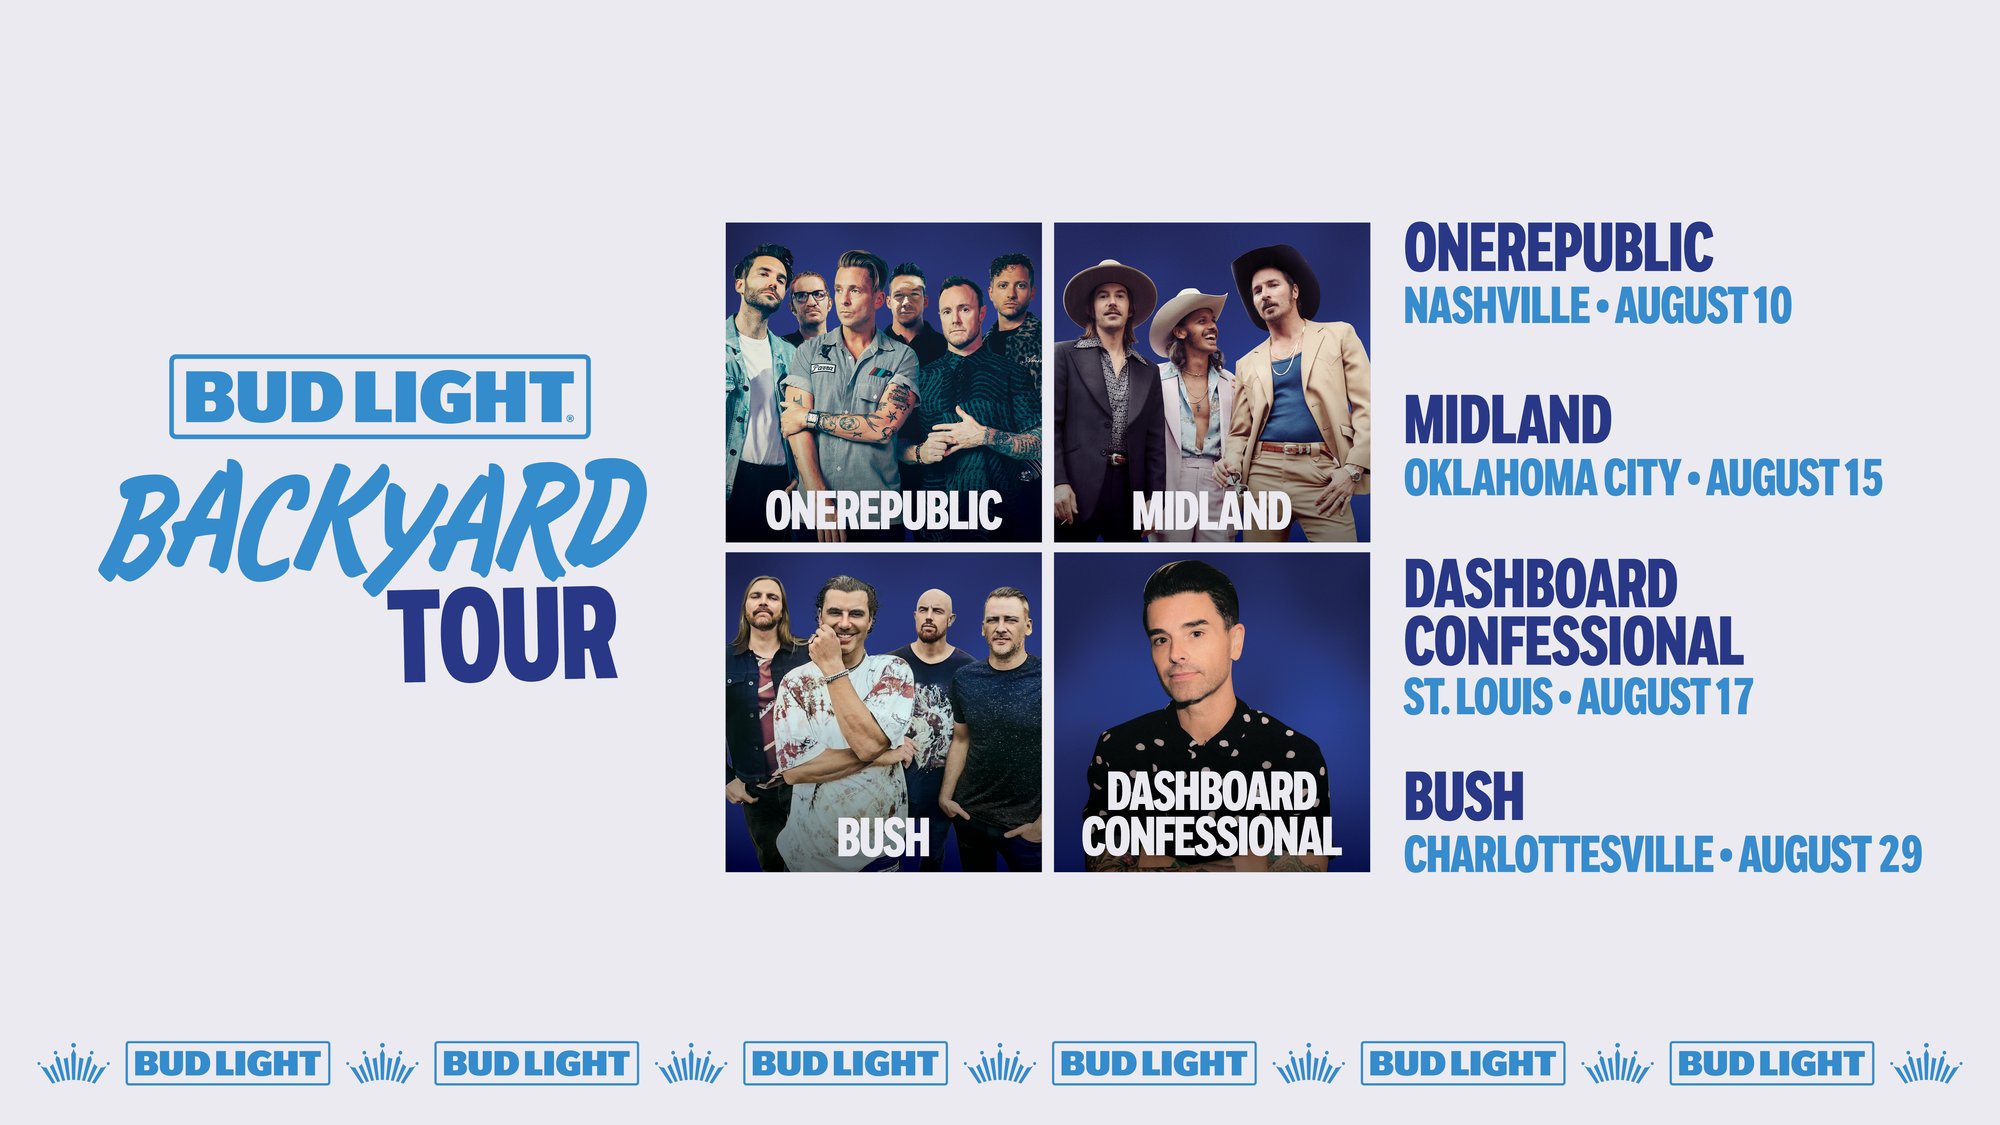 Bud Light Announces First-Ever Bud Light Backyard Tour Summer Concert Series Featuring OneRepublic, Midland, Dashboard Confessional and Bush